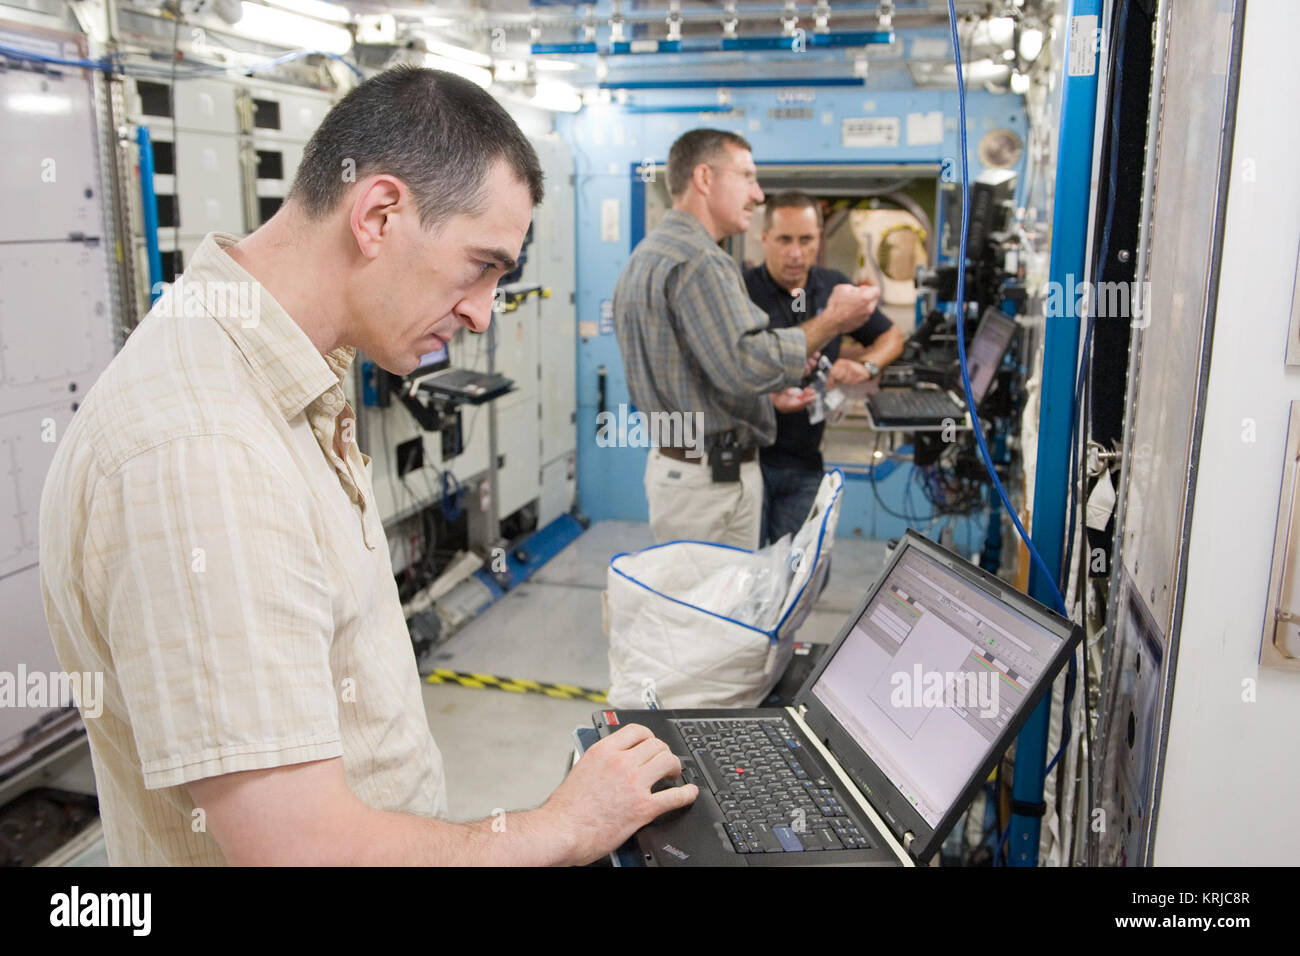 PHOTO DATE: 09-20-10 LOCATION: Bldg 9NW, ISS Mockups SUBJECT:  Expedition 29 crew members Dan Burbank, Anton Shkaplerov and Anatoly Ivanishin during Routine Ops MS02 training with instructor Bill Frank. PHOTOGRAPHER: James Blair Anatoly Ivanishin JSC Stock Photo